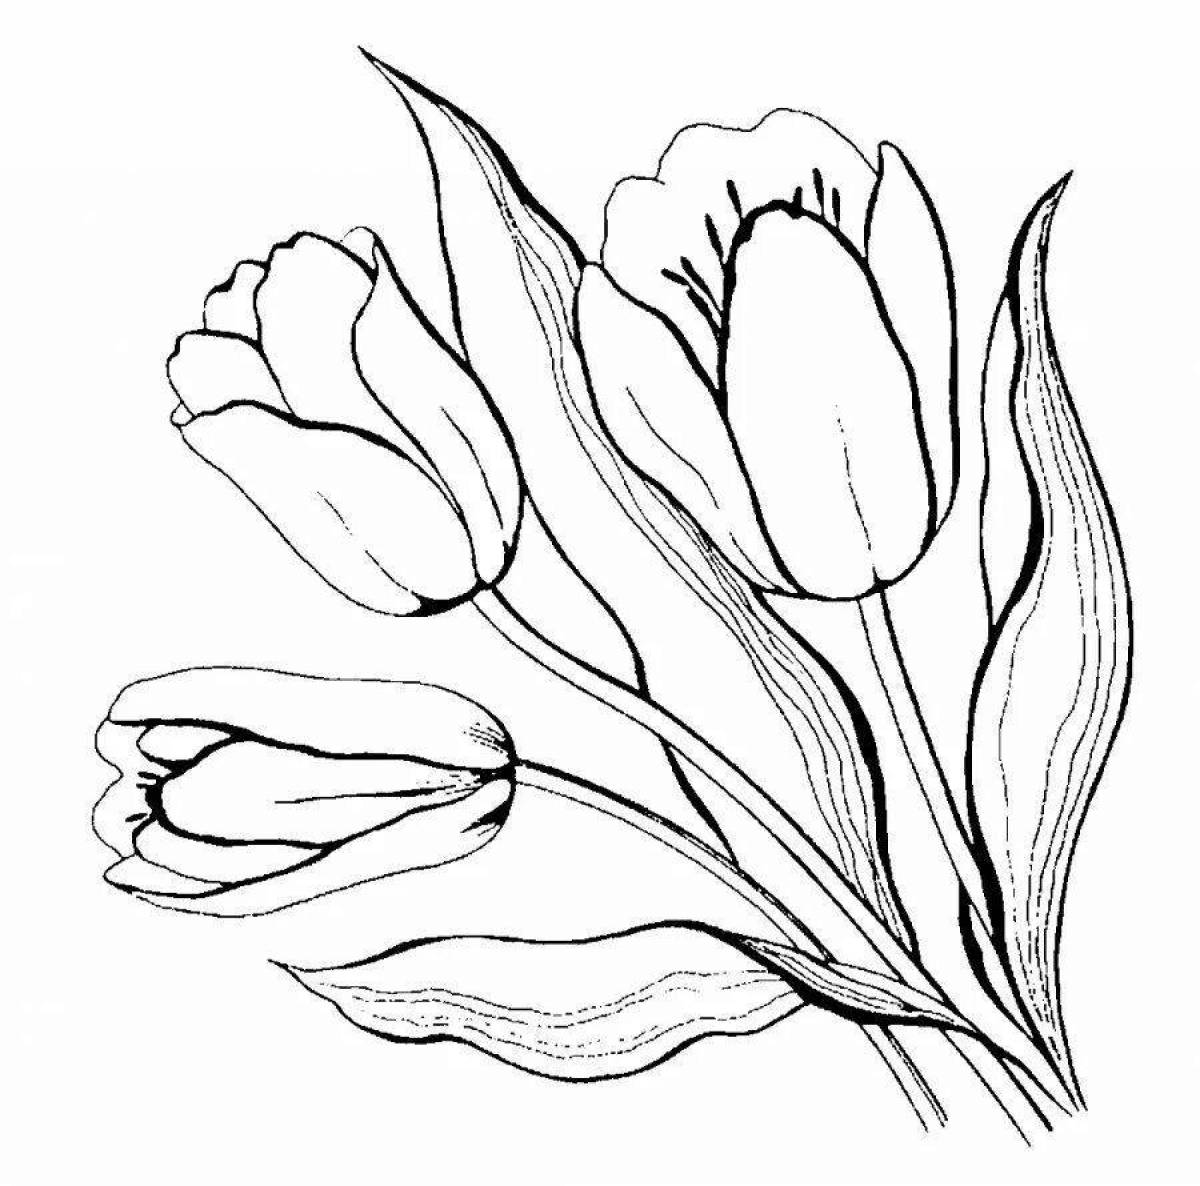 Coloring book shining spring tulips